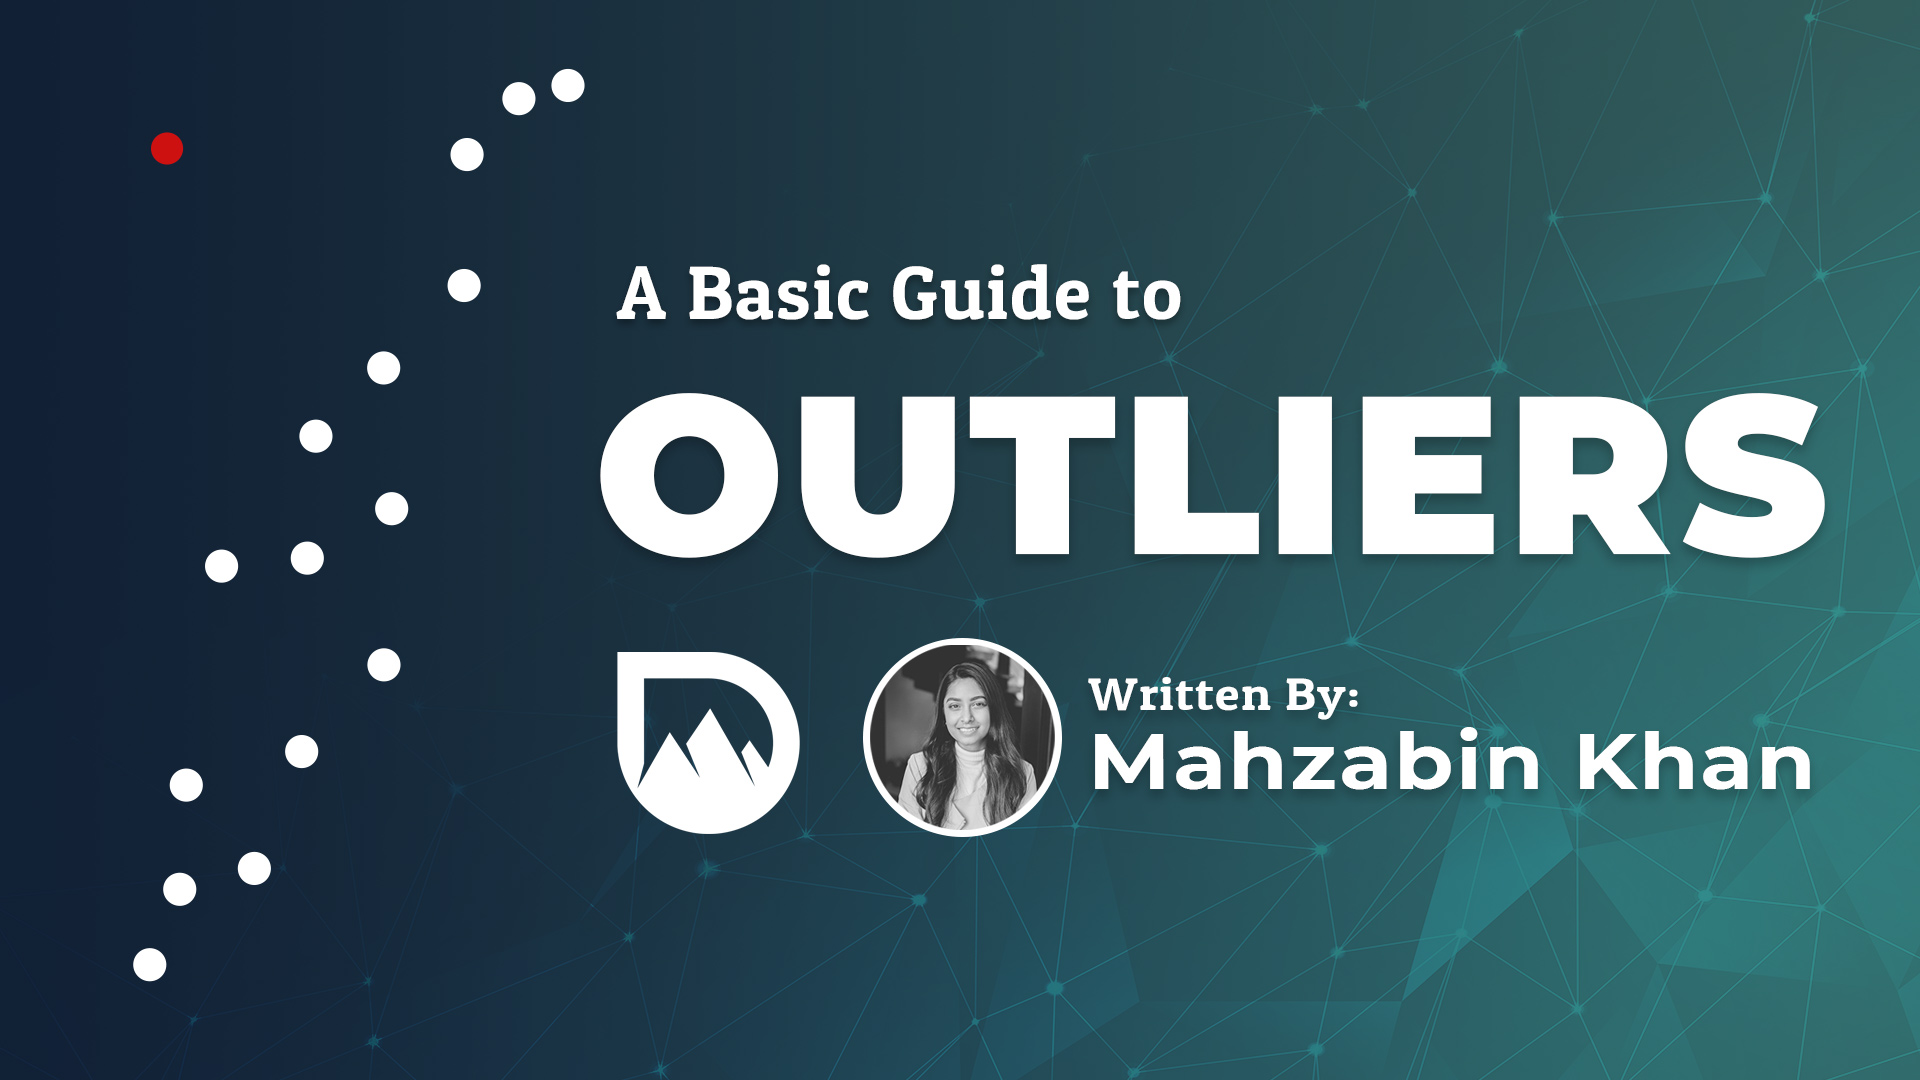 A Basic Guide to Outliers with Mahzabin Khan